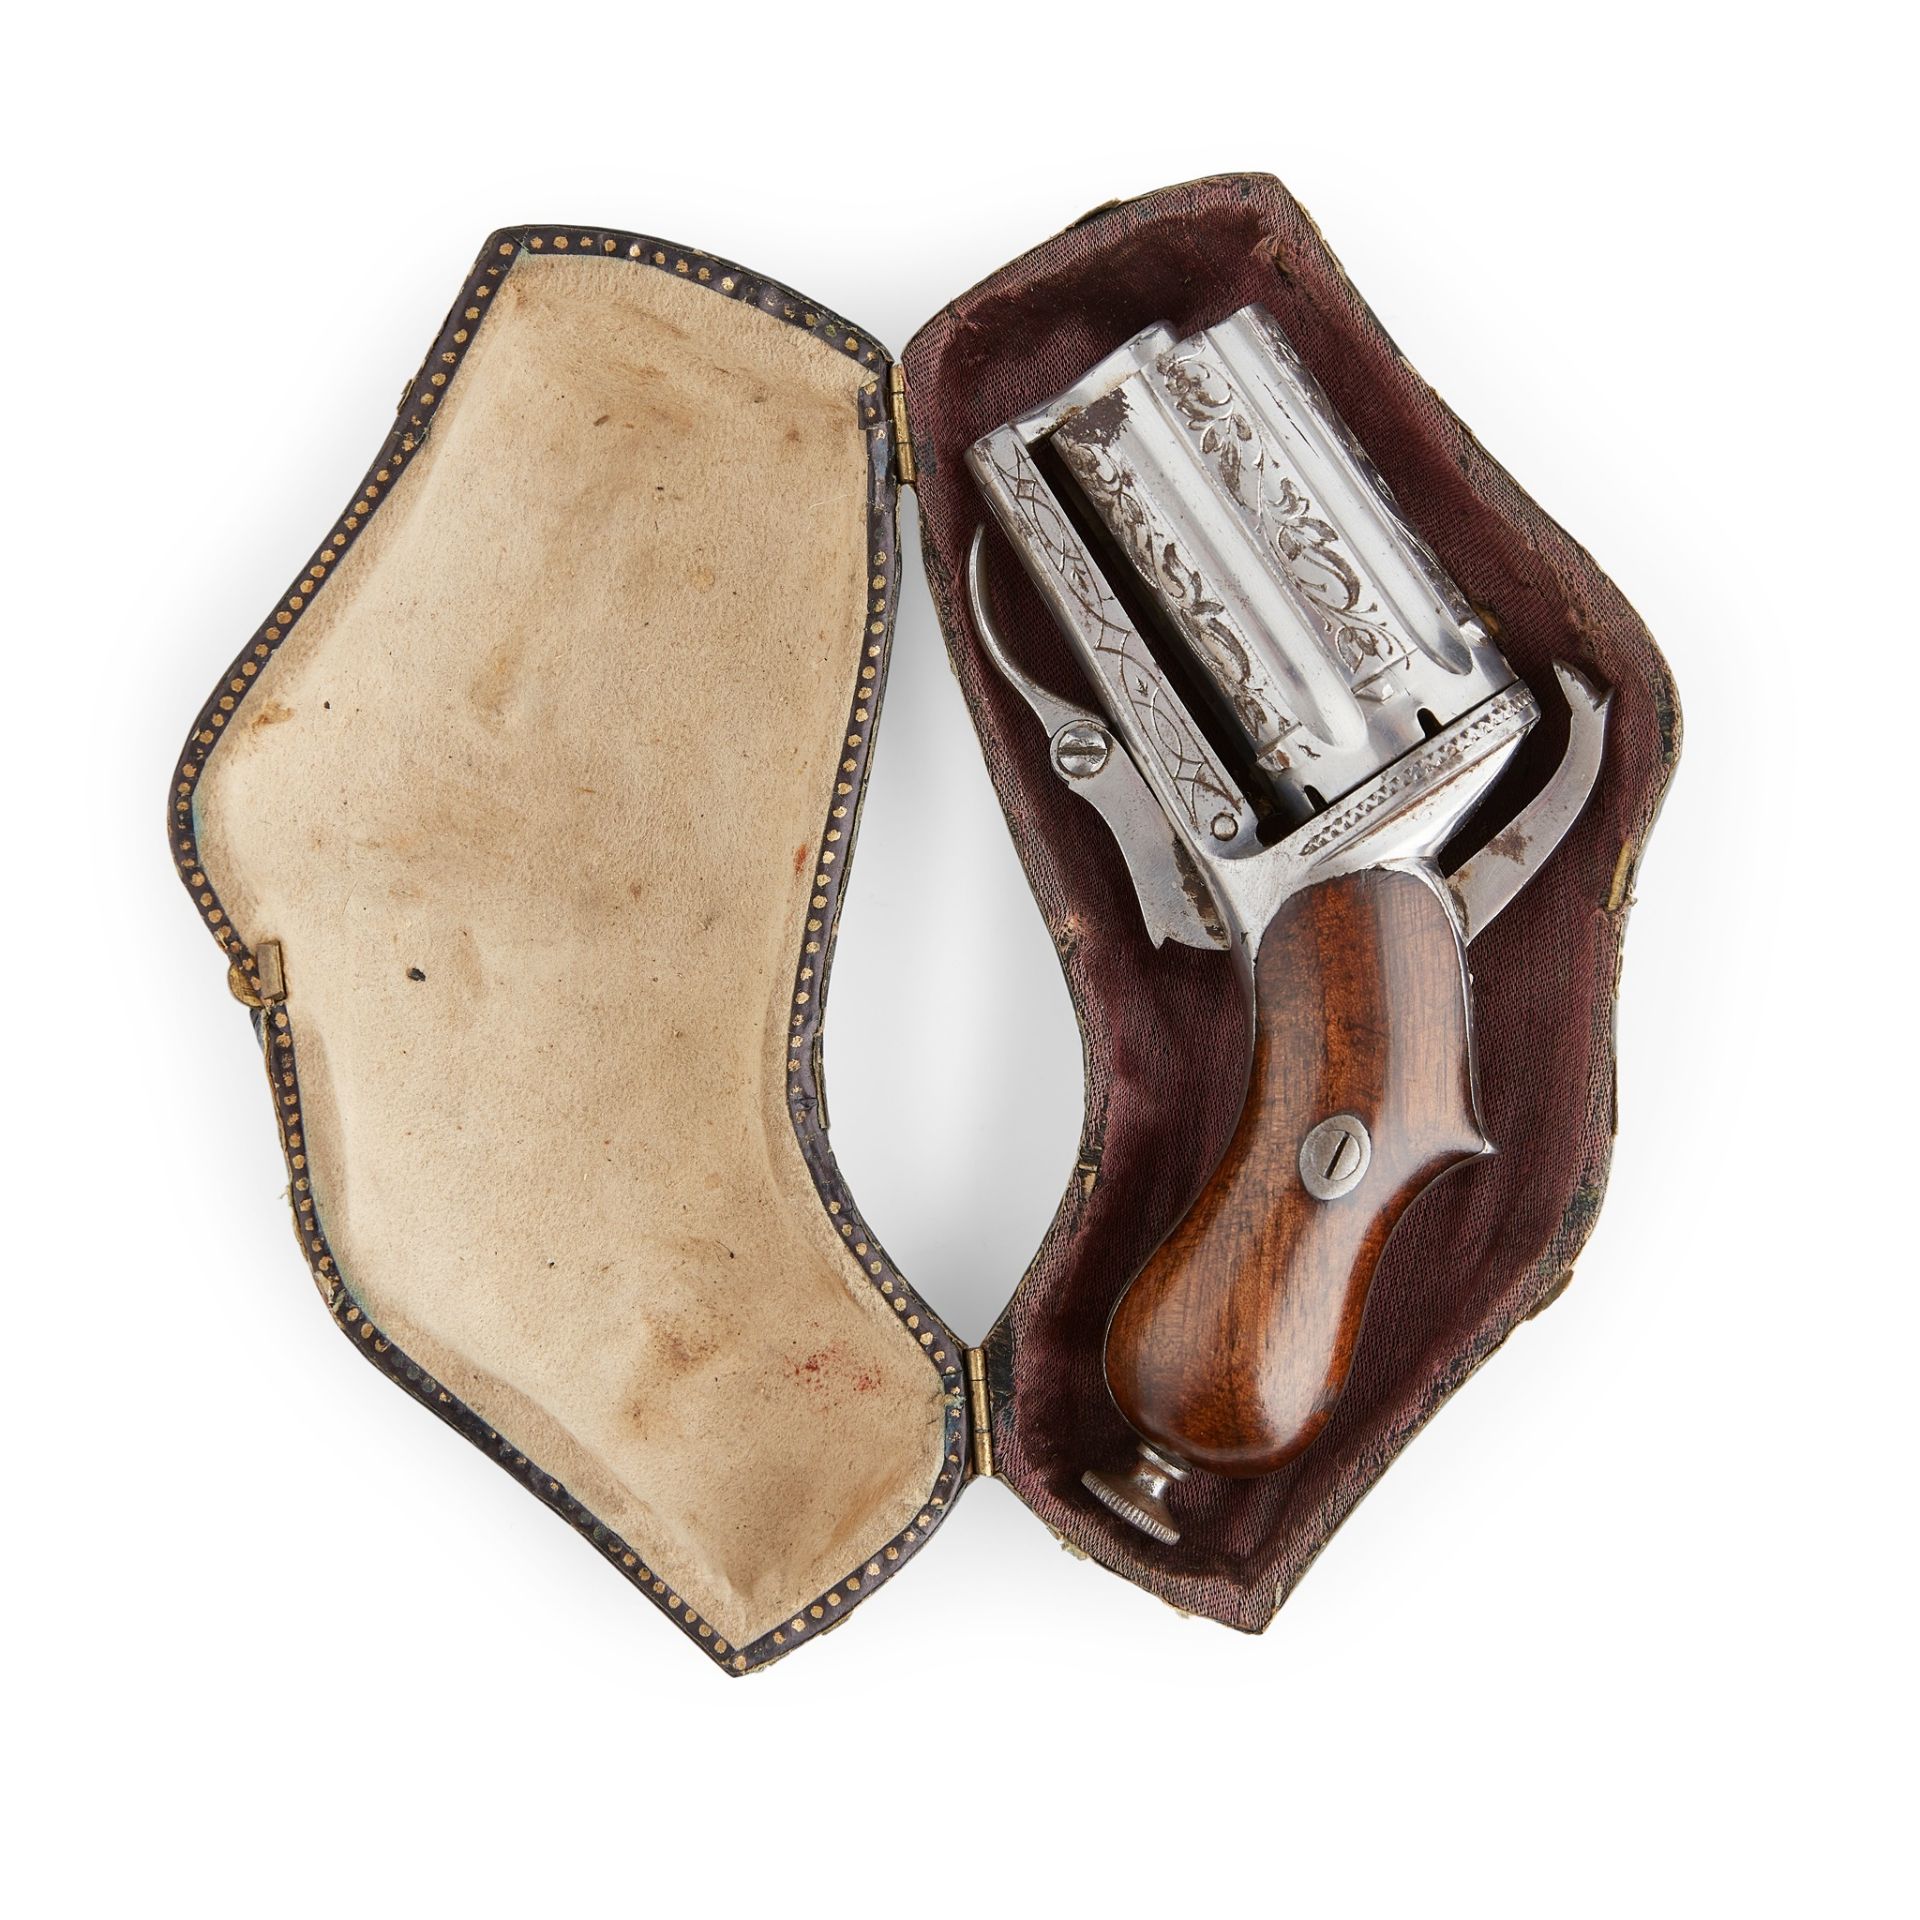 POLISHED STEEL AND ENGRAVED SIX BARREL PIN-FIRE PEPPER BOX TRAVELLING PISTOL 19TH CENTURY - Image 2 of 2